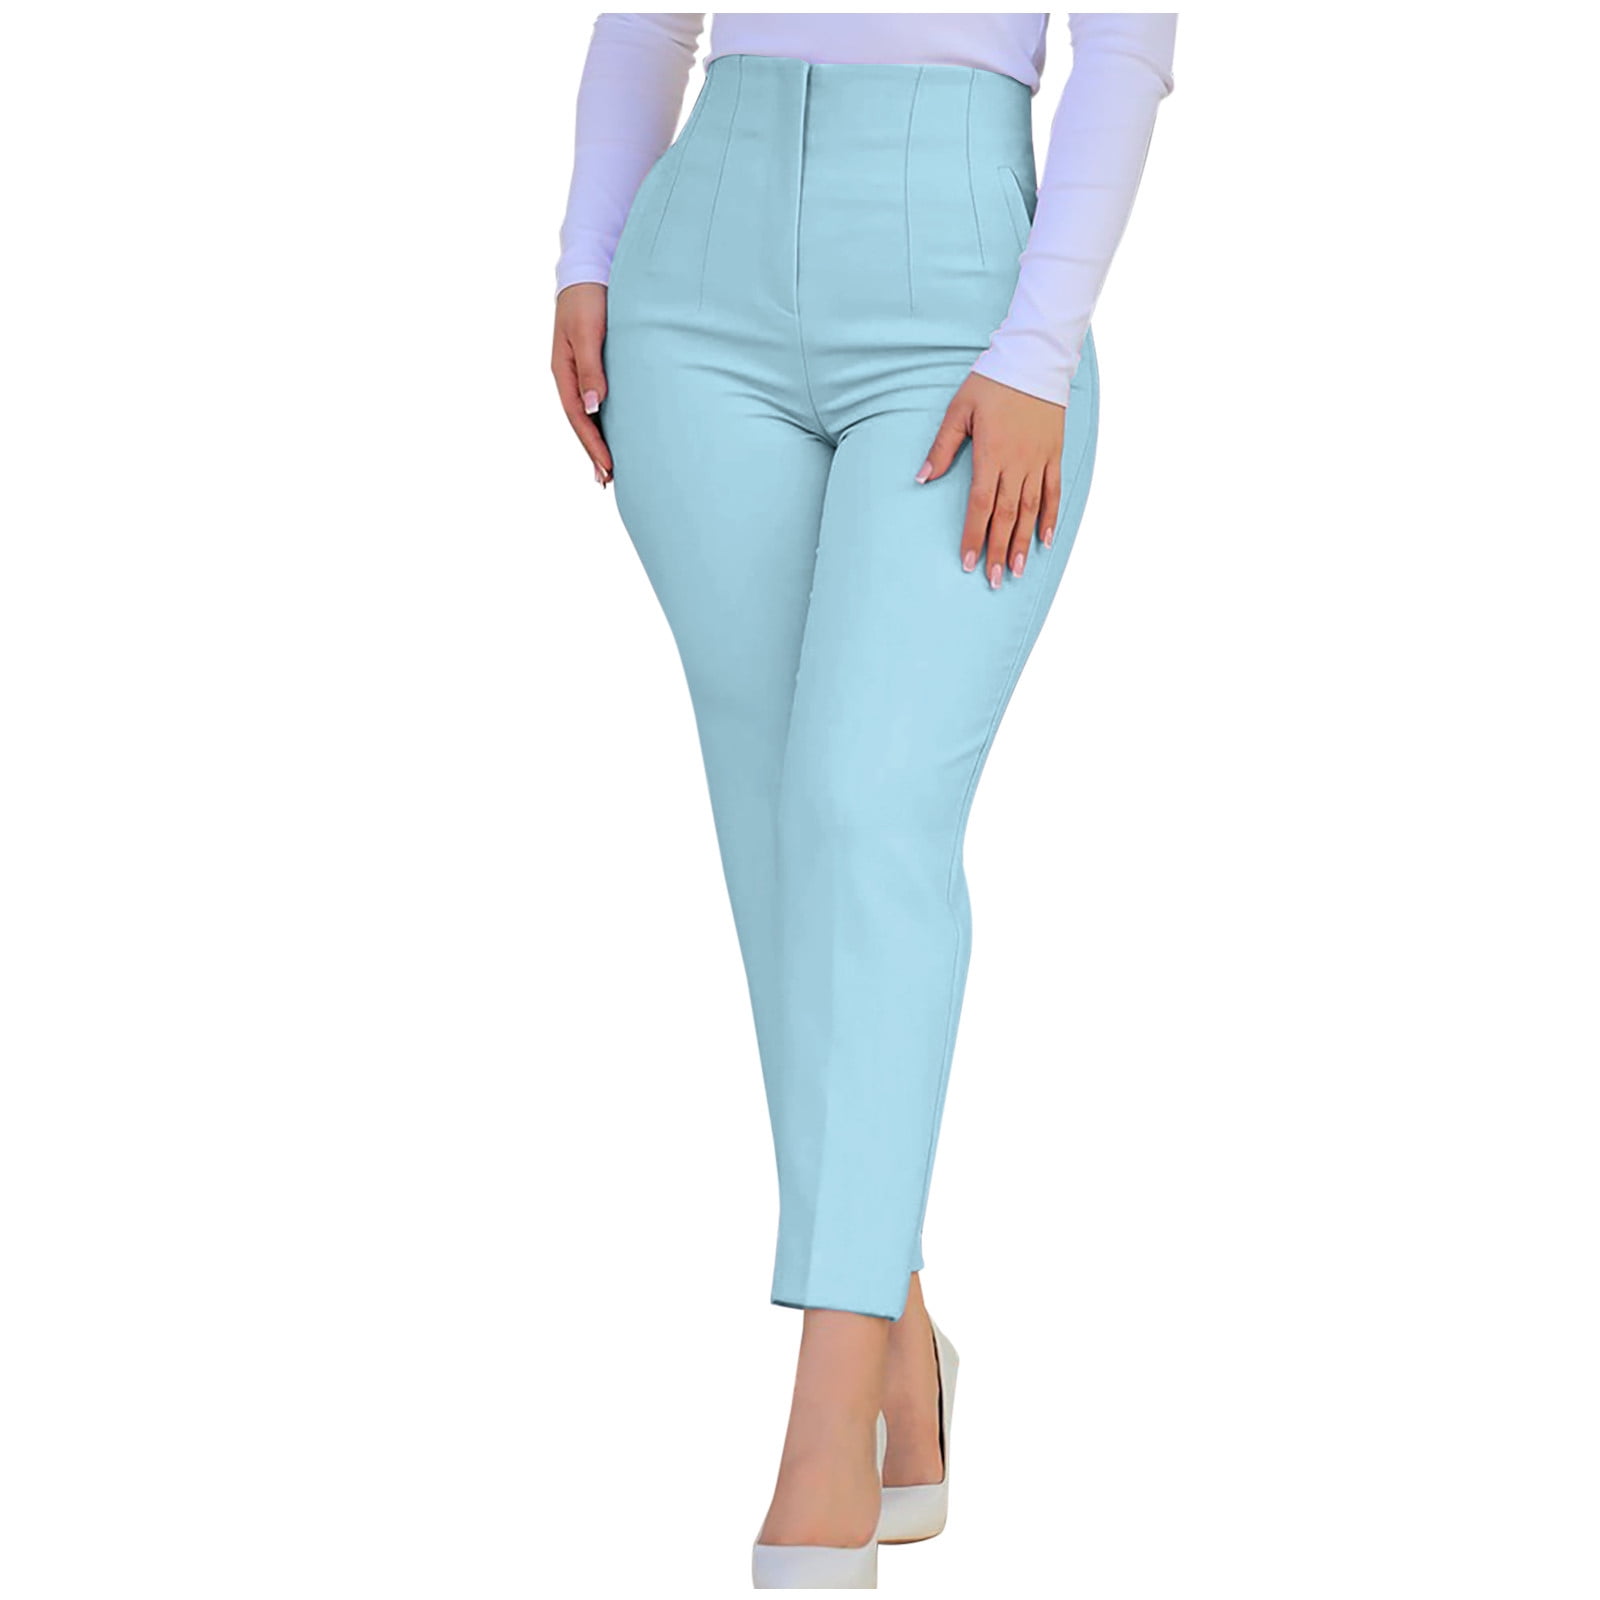 RYRJJ Women\'s Cropped Dress Pants with Pockets Business Office Casual  Pleated High Waist Slim Fit Pencil Pants for Work Trousers(Light Blue,M)